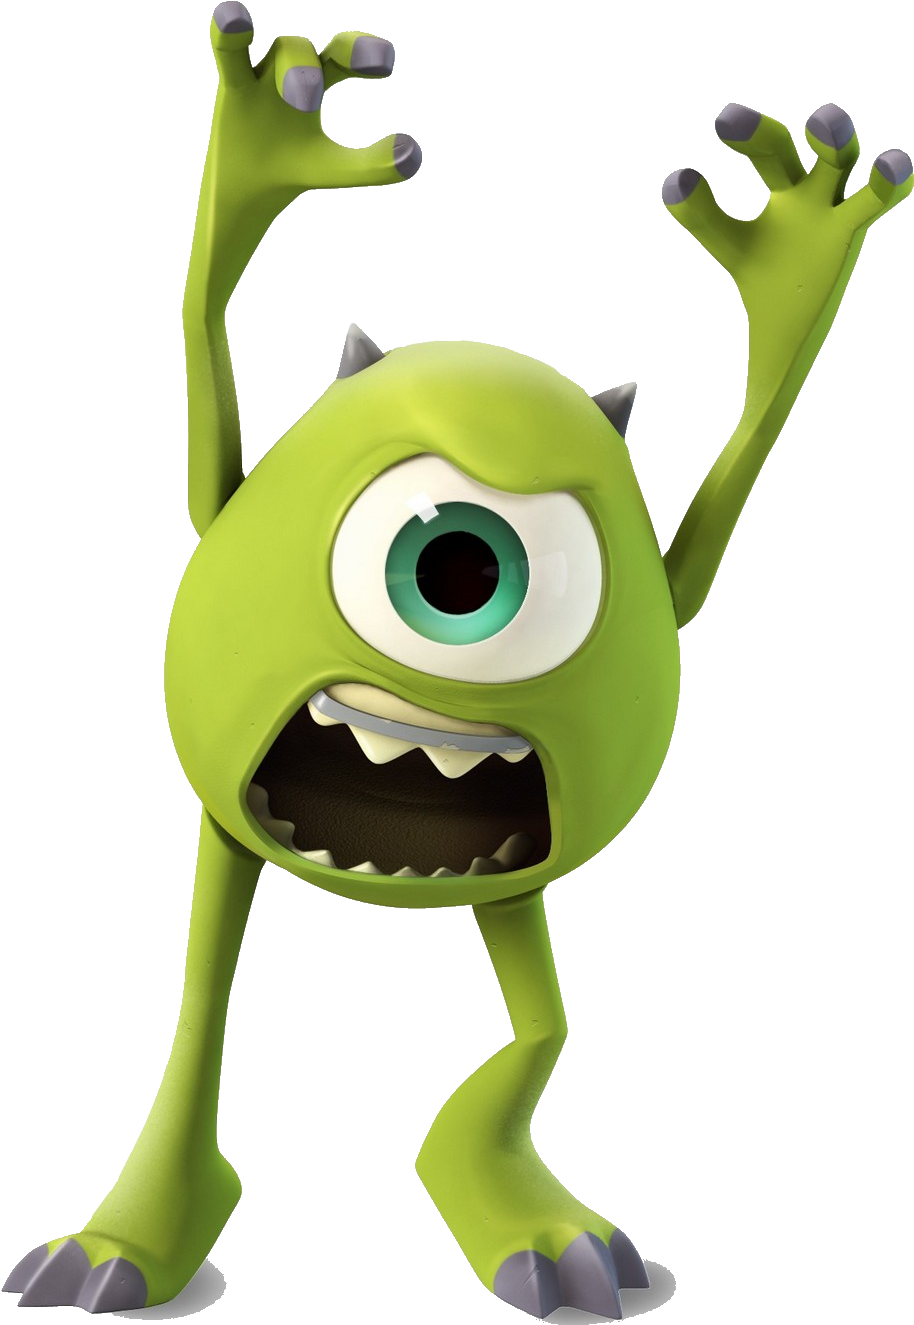 Green One Eyed Monster Cartoon PNG